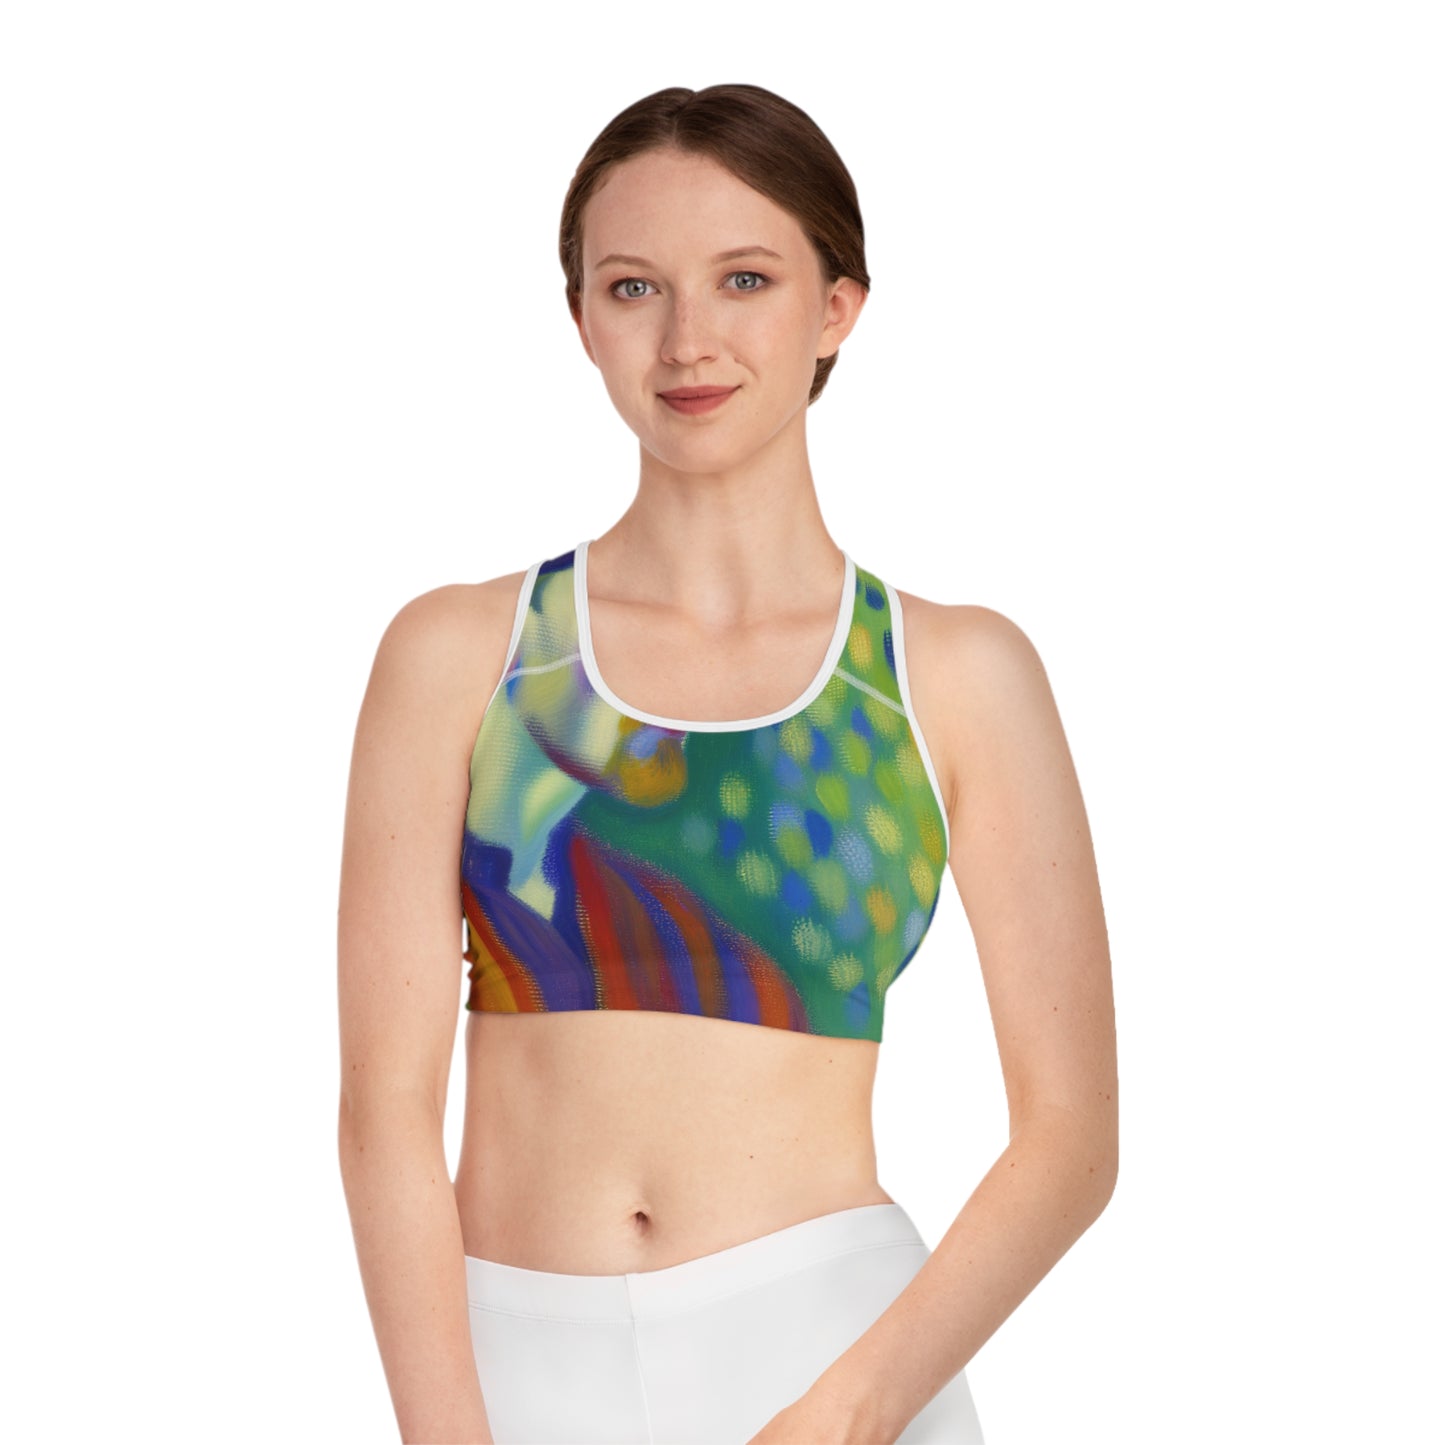 "Serene Resilience: A Frida's Solitude in hues" - High Performance Sports Bra